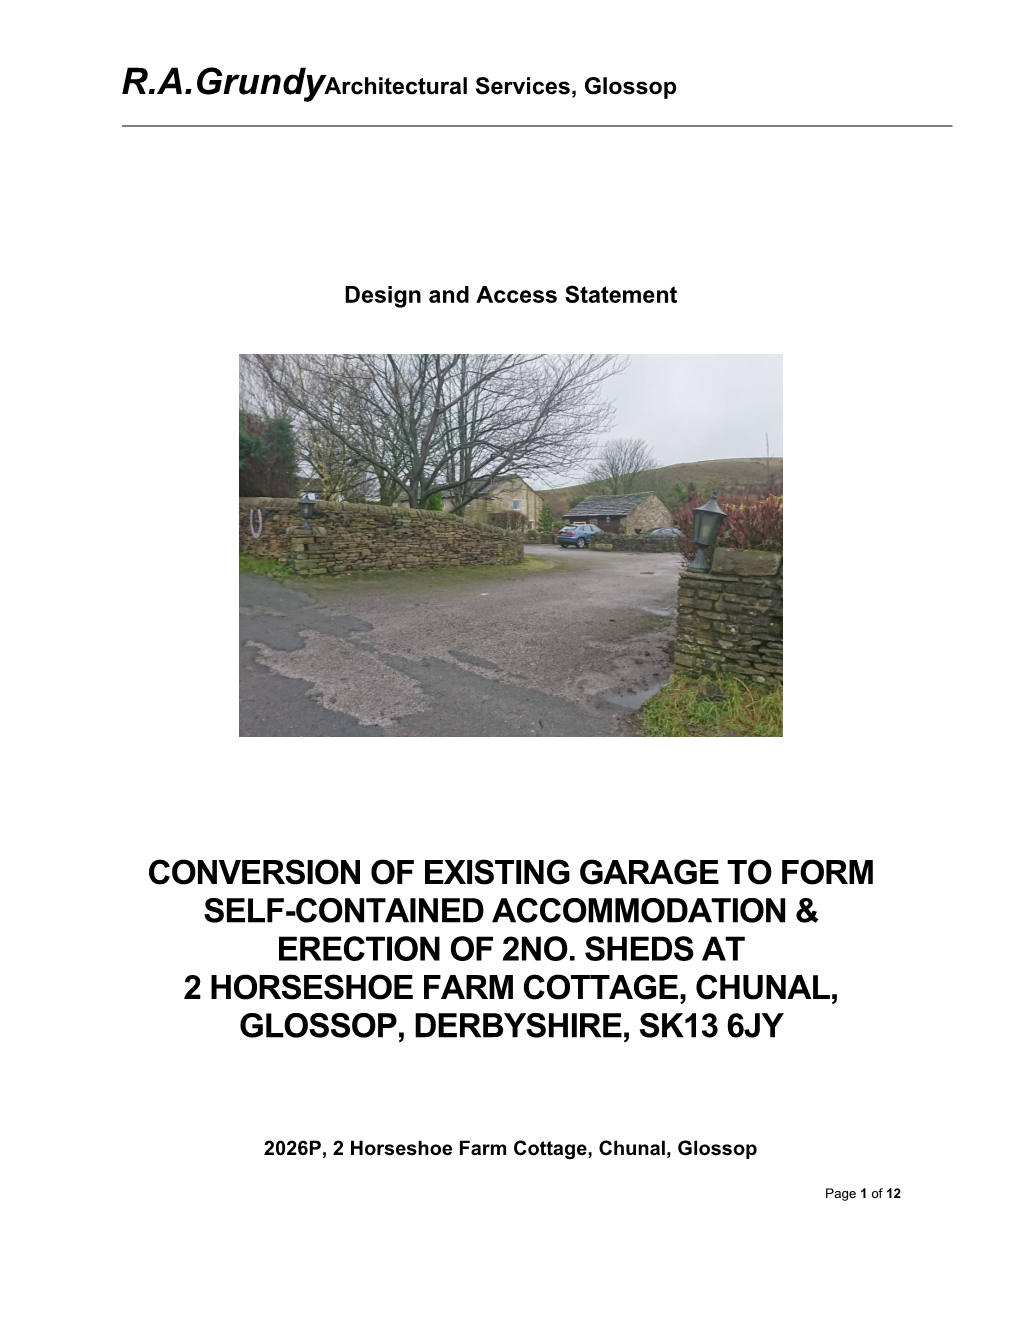 Conversion of Existing Garage to Form Self-Contained Accommodation & Erection of 2No